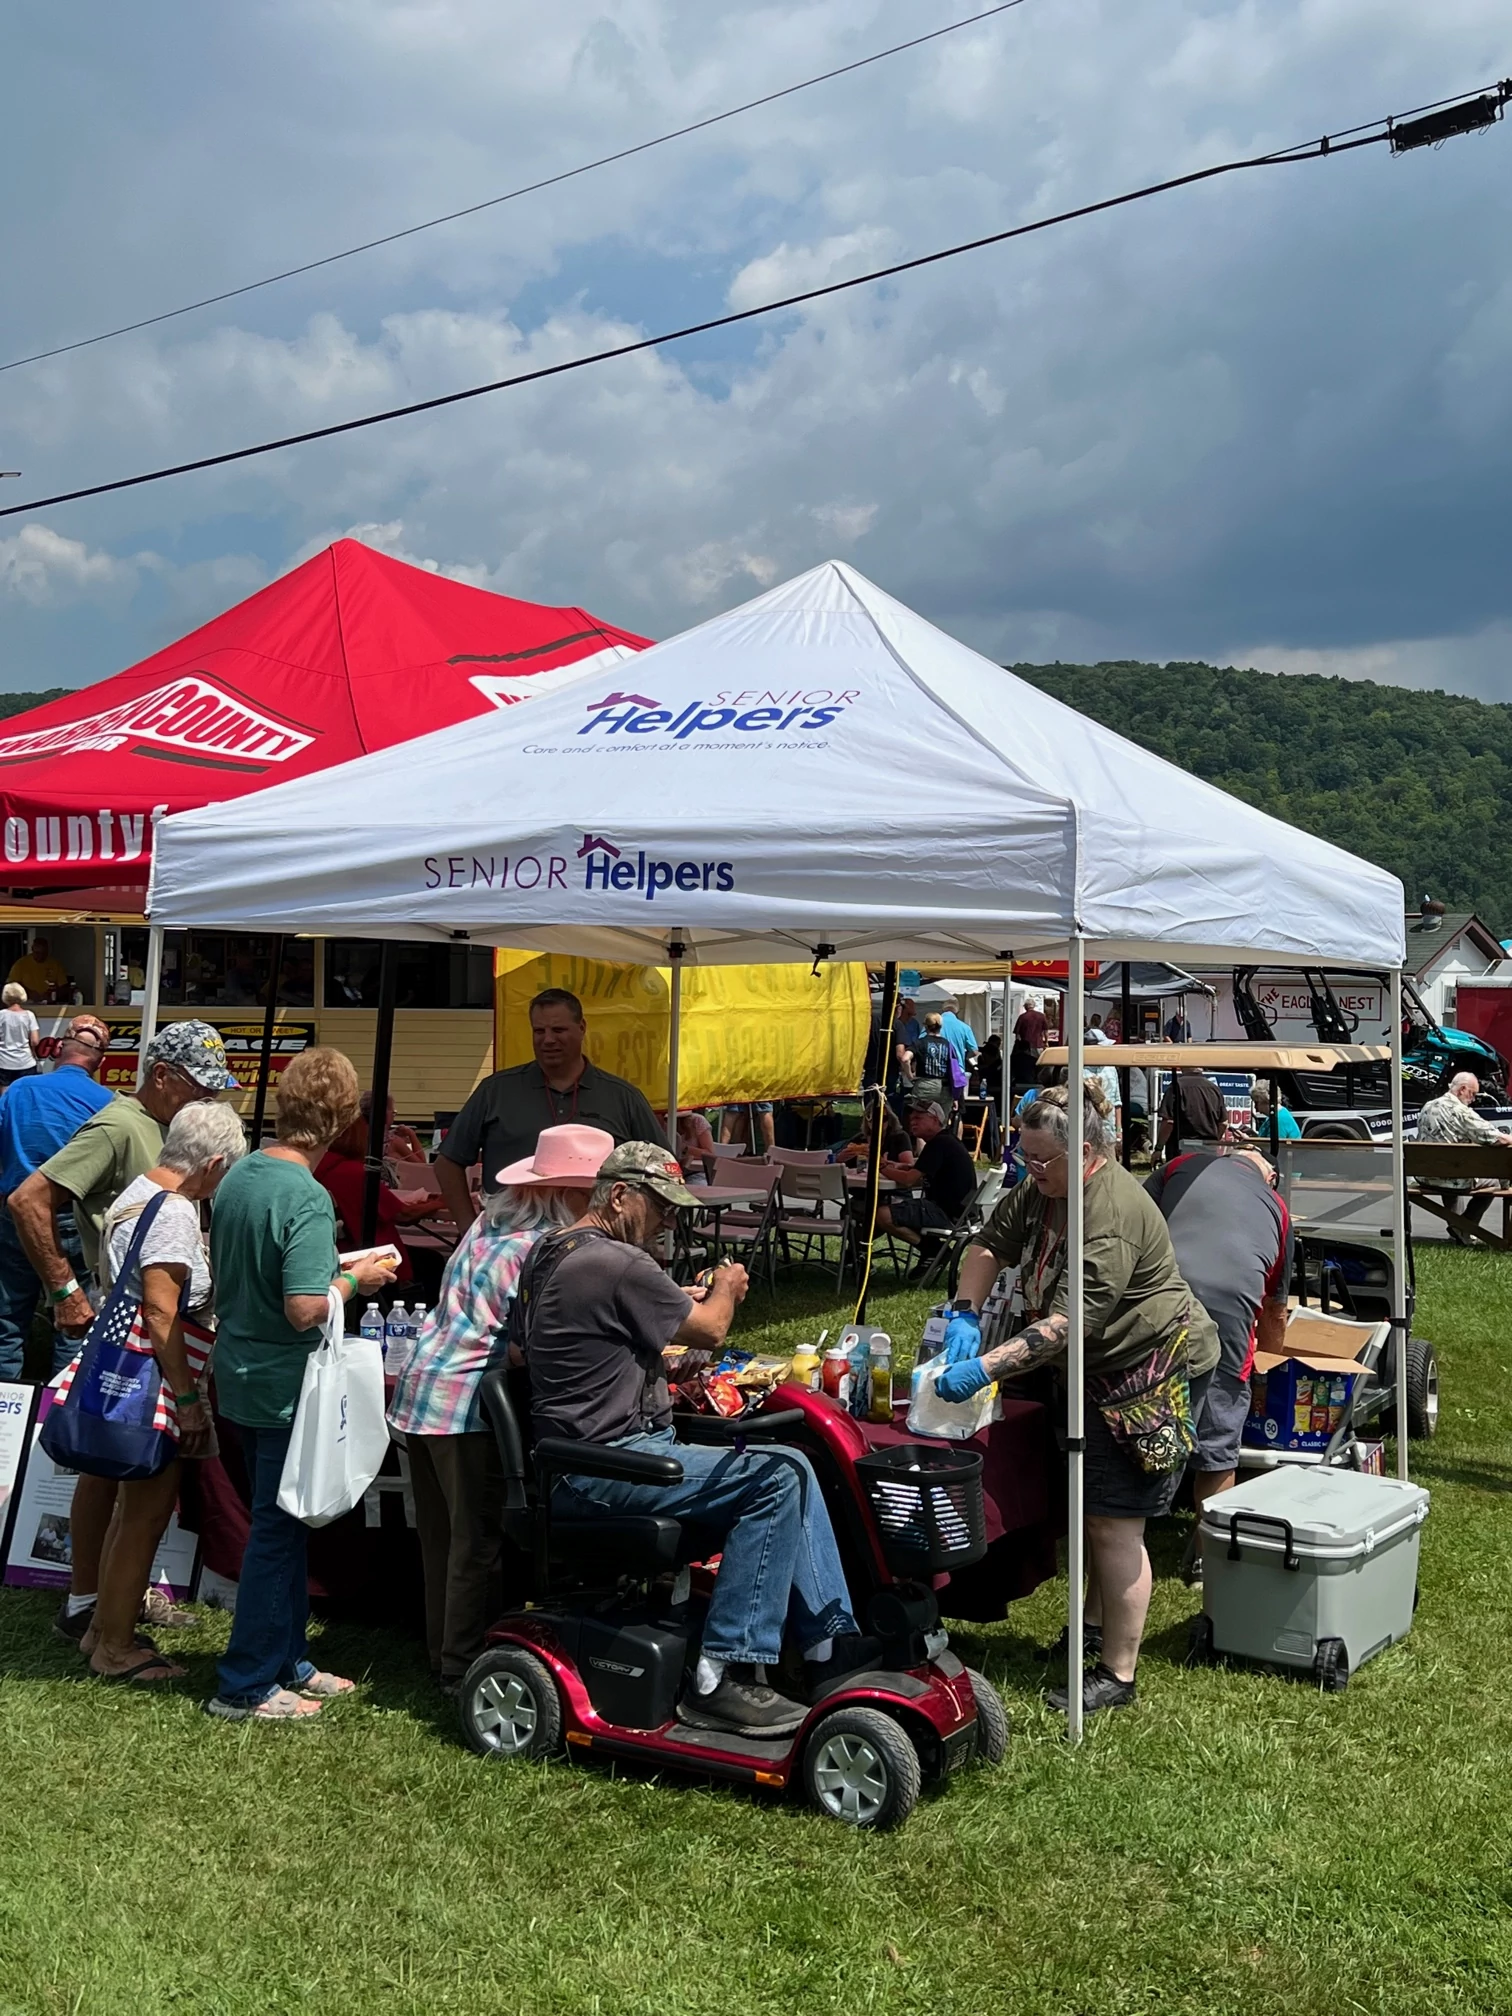 These are from August 9th at our Warren County Fair in Pittsfield, PA, during the Veteran's Ceremony that our Senior Helpers sponsored.  We had an hour ceremony with singing, speakers, blessings/prayers, and the Missing Mans Table.  We also handed out FREE Hot Dogs, Snacks, and Water to our veterans.